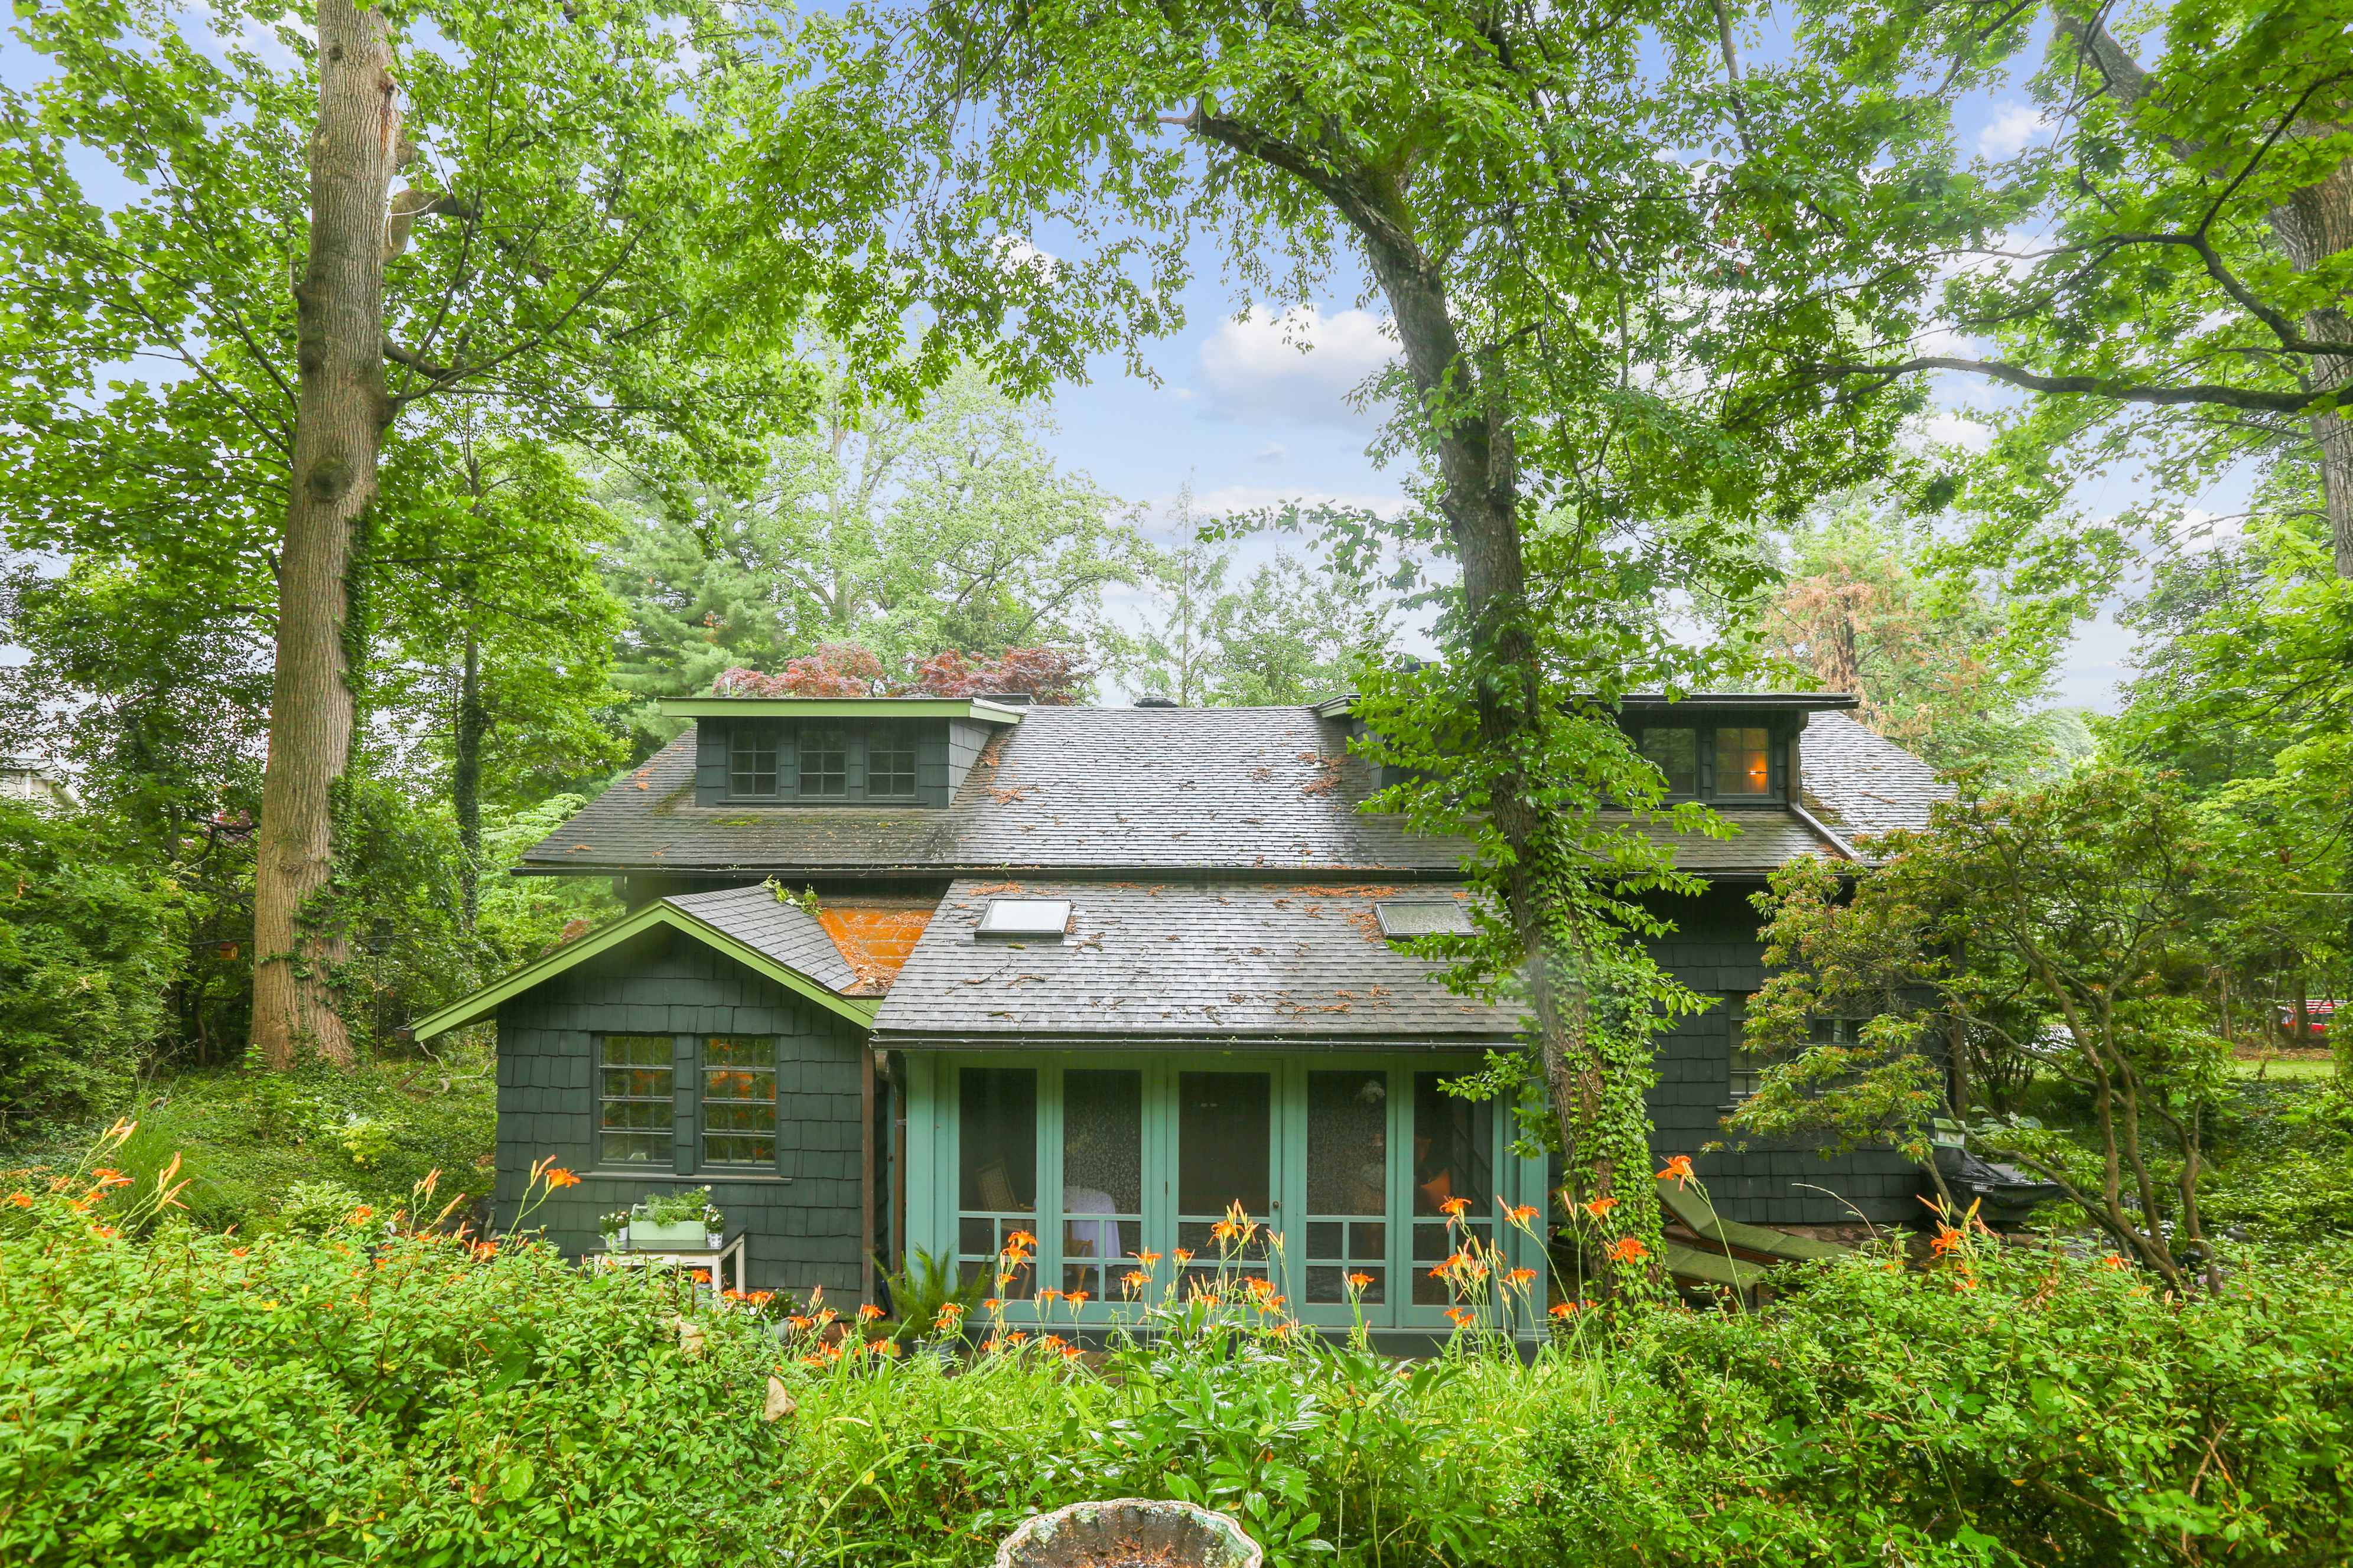 An exterior view of an Arts and Crafts style home that sits surrounded by green foliage. 